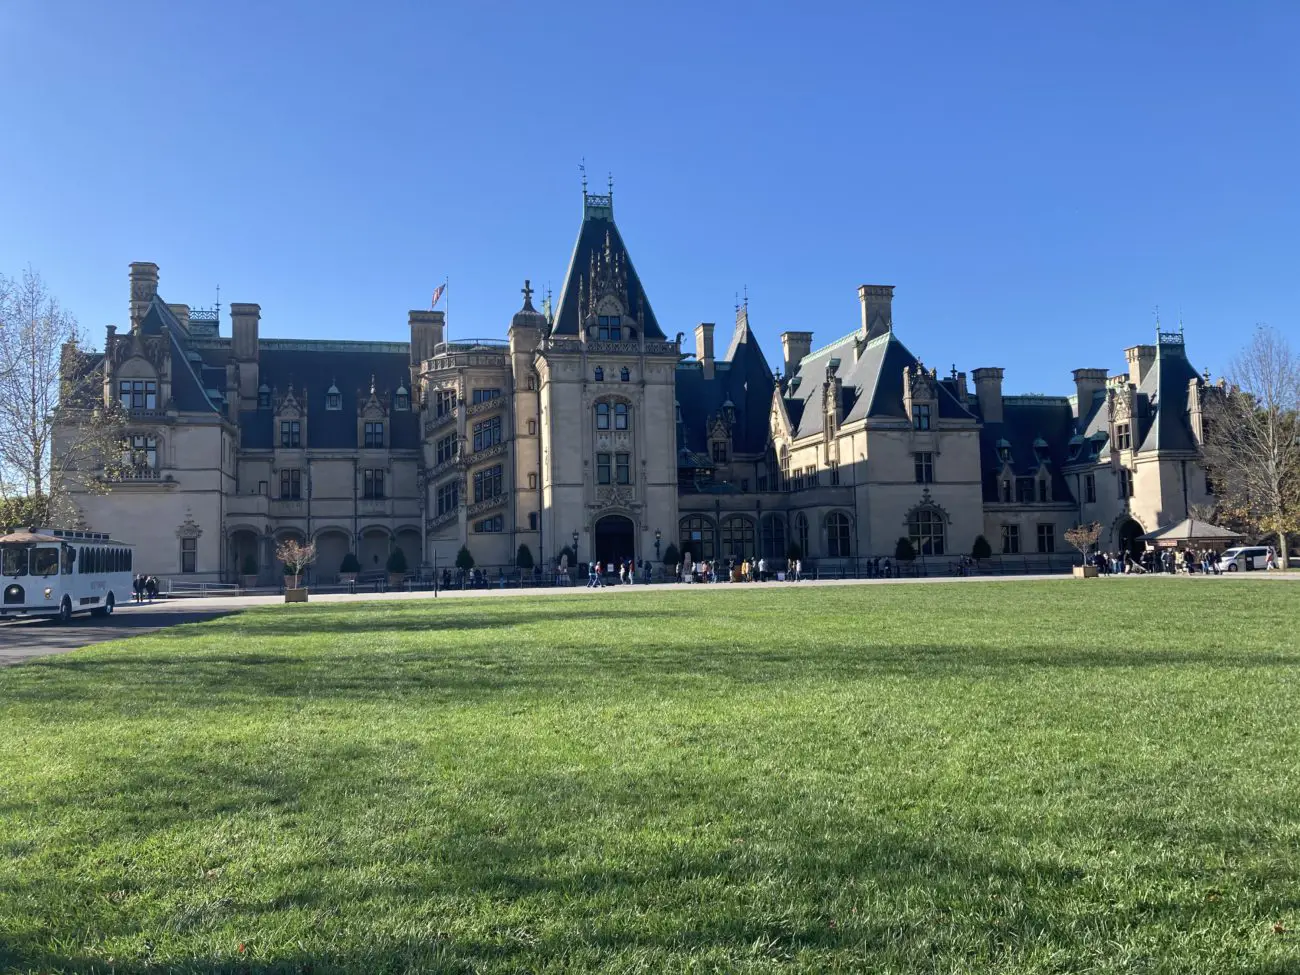 Late Summer Day on the Biltmore Estate